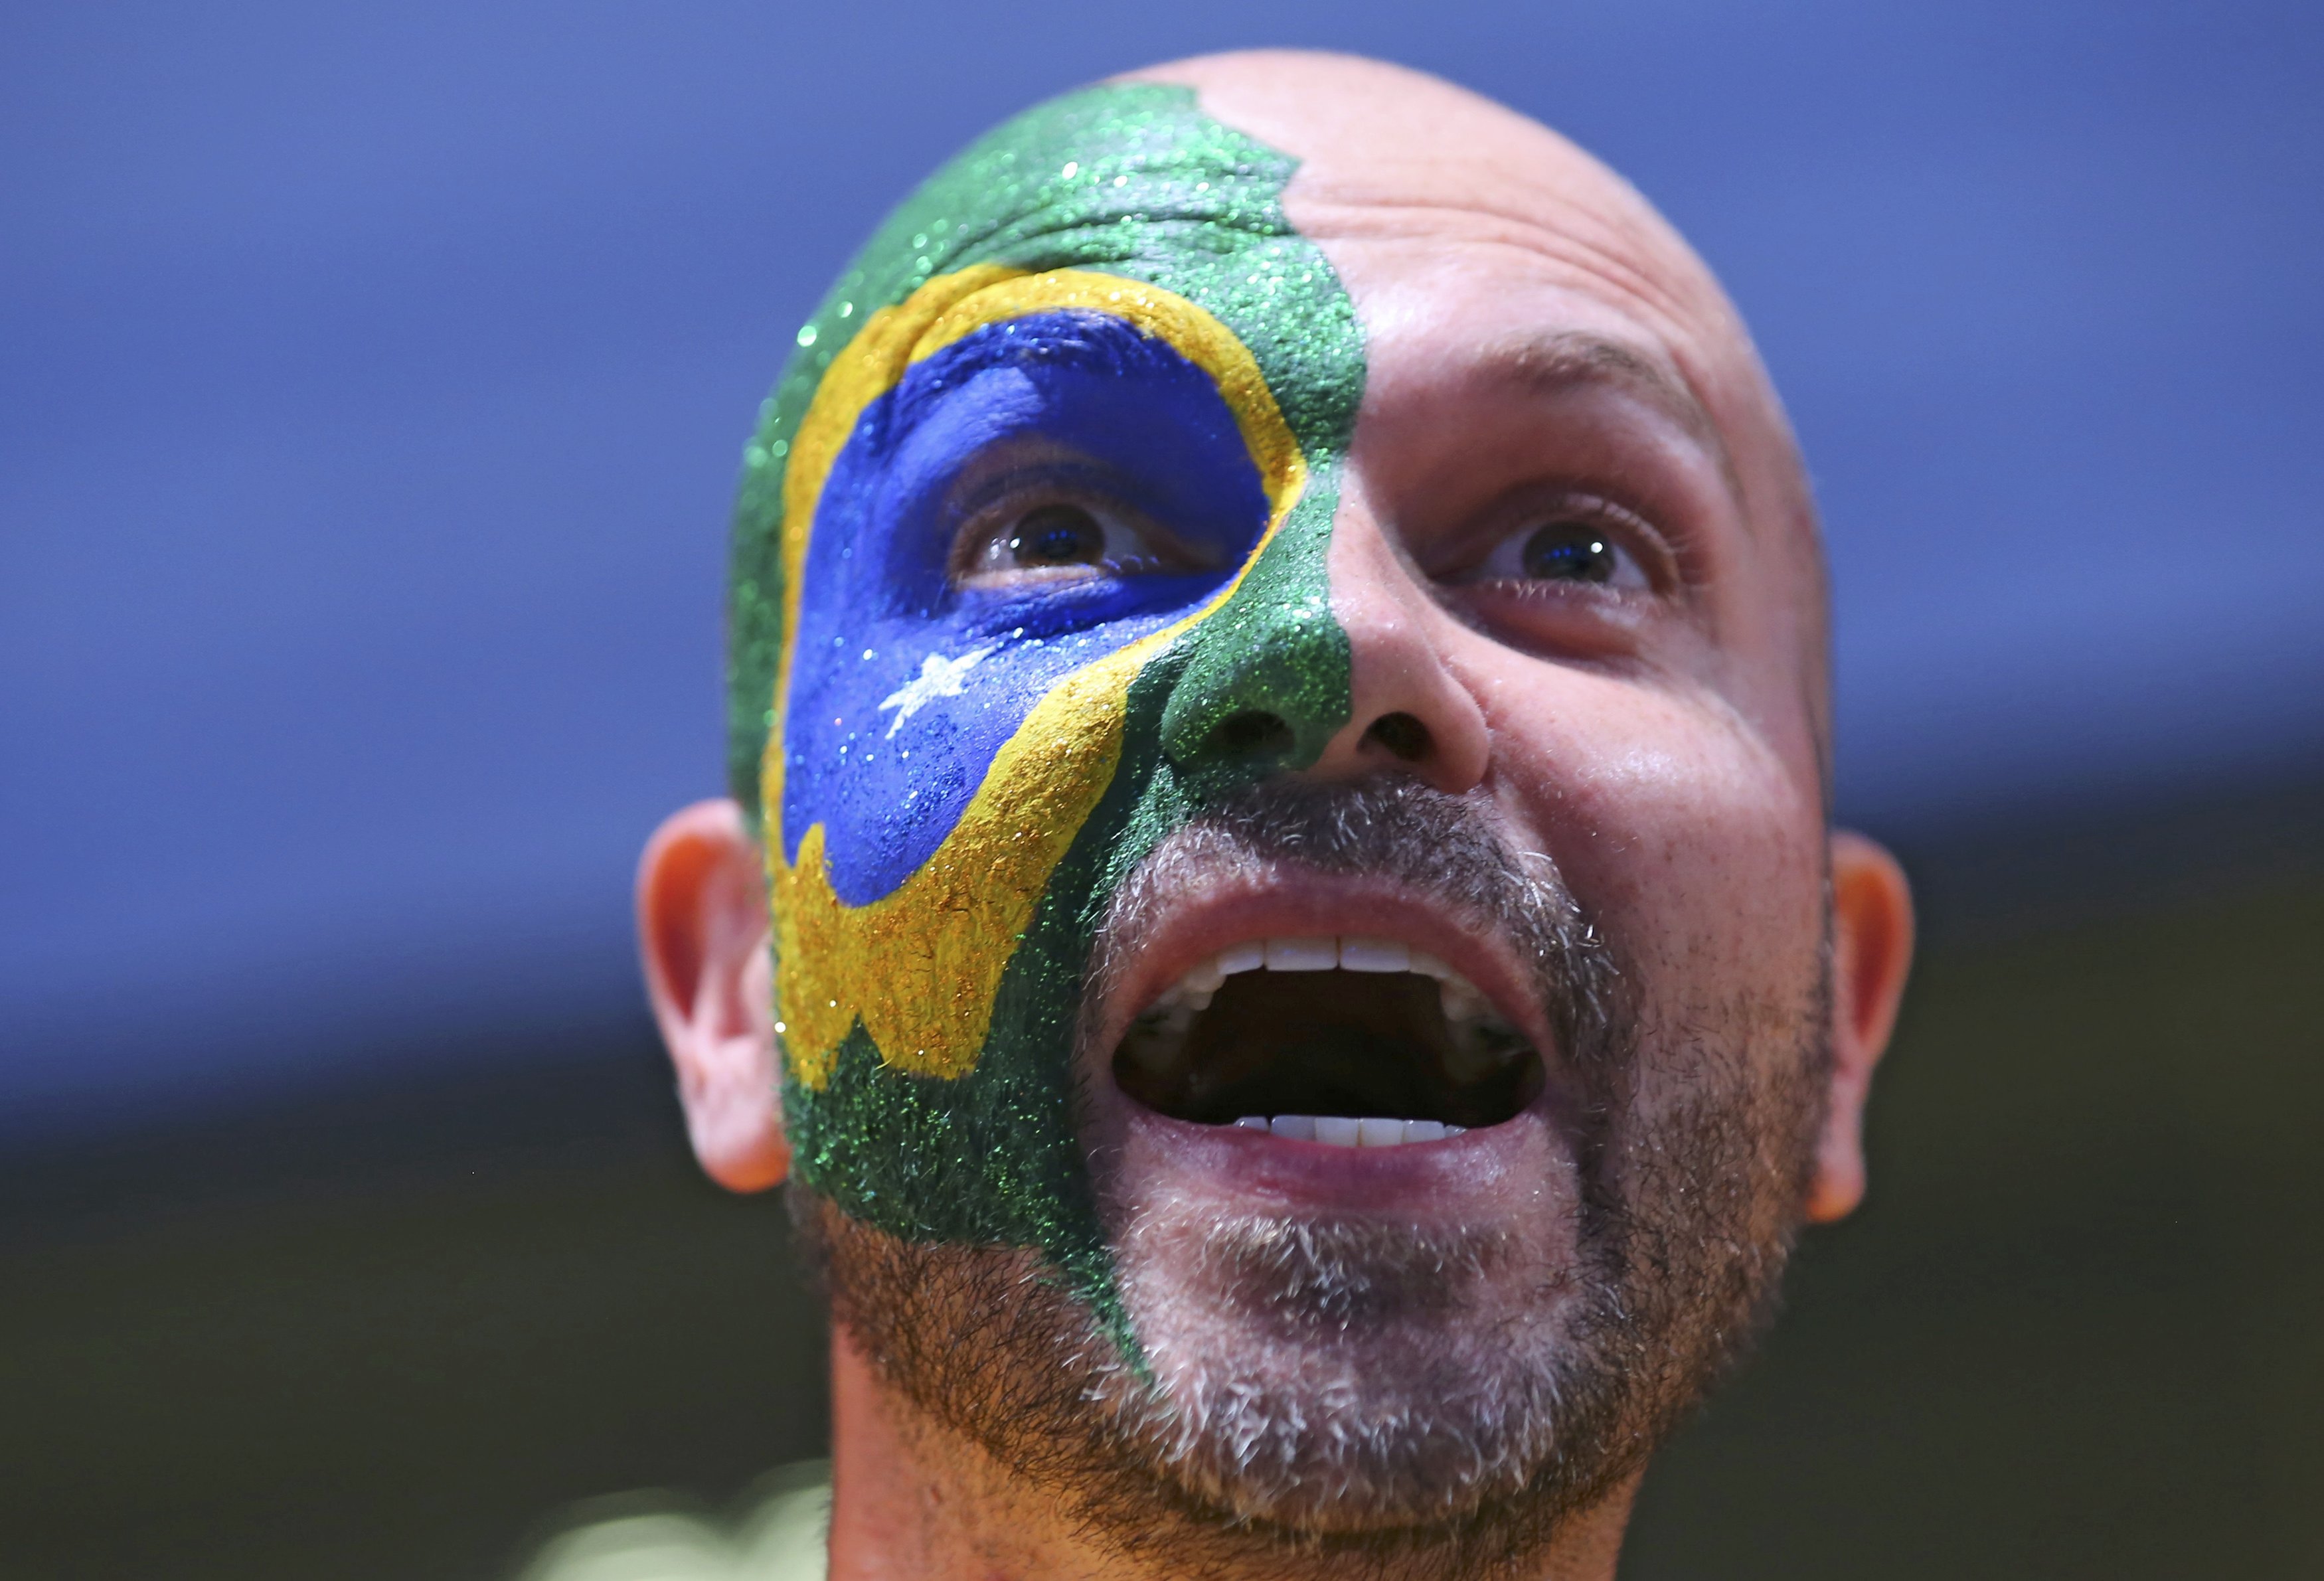 2016 Rio Olympics - Opening ceremony - Maracana - Rio de Janeiro, Brazil - 05/08/2016. Brazilian fan before the opening ceremony. REUTERS/Mike Blake FOR EDITORIAL USE ONLY. NOT FOR SALE FOR MARKETING OR ADVERTISING CAMPAIGNS.